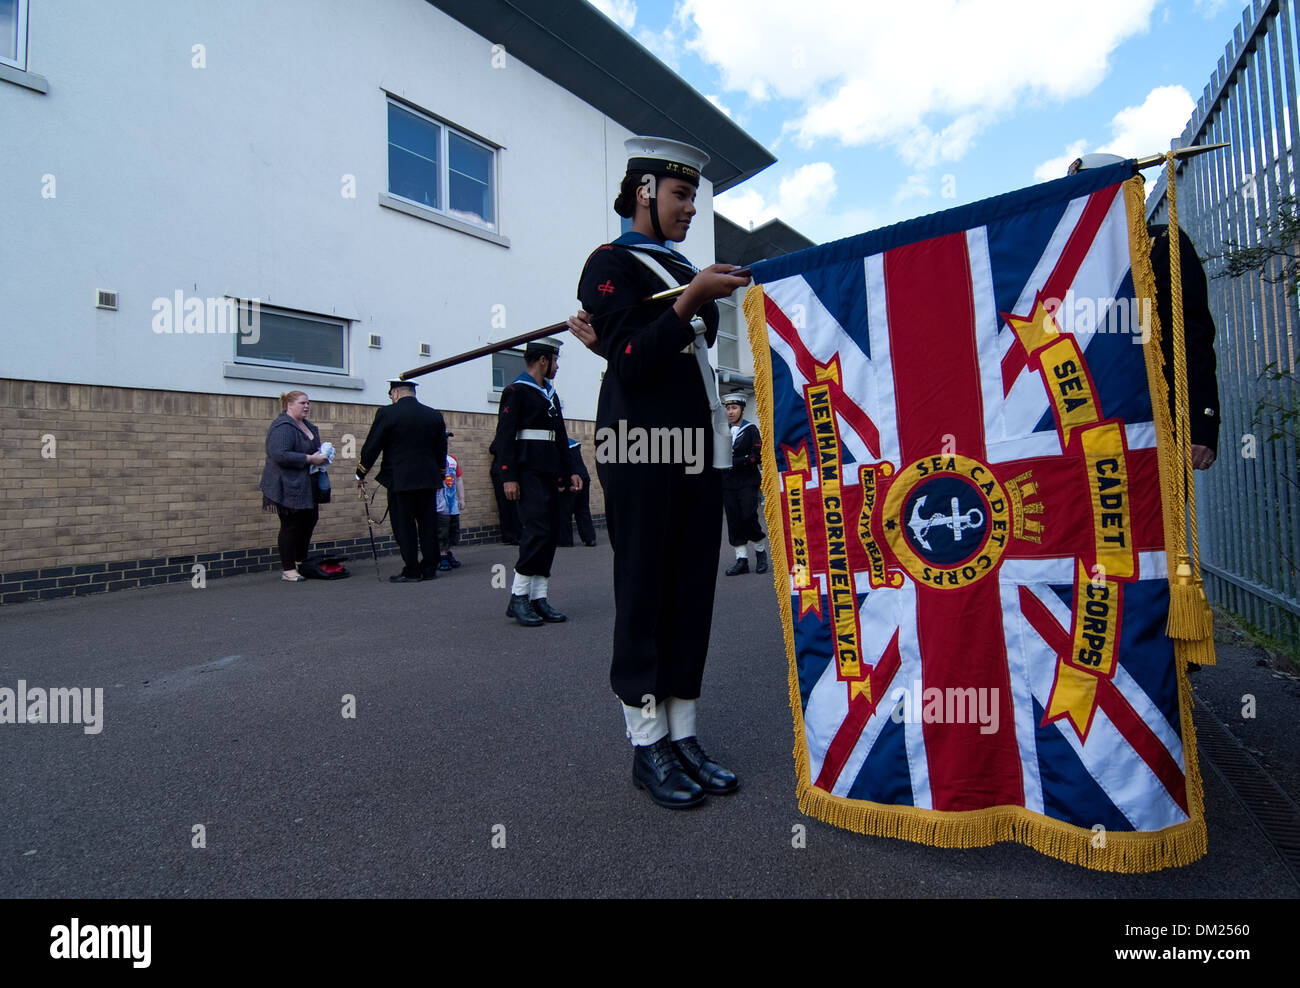 Final Dress rehearsal for a sea cadet of Newham Cornwell VC. Stock Photo